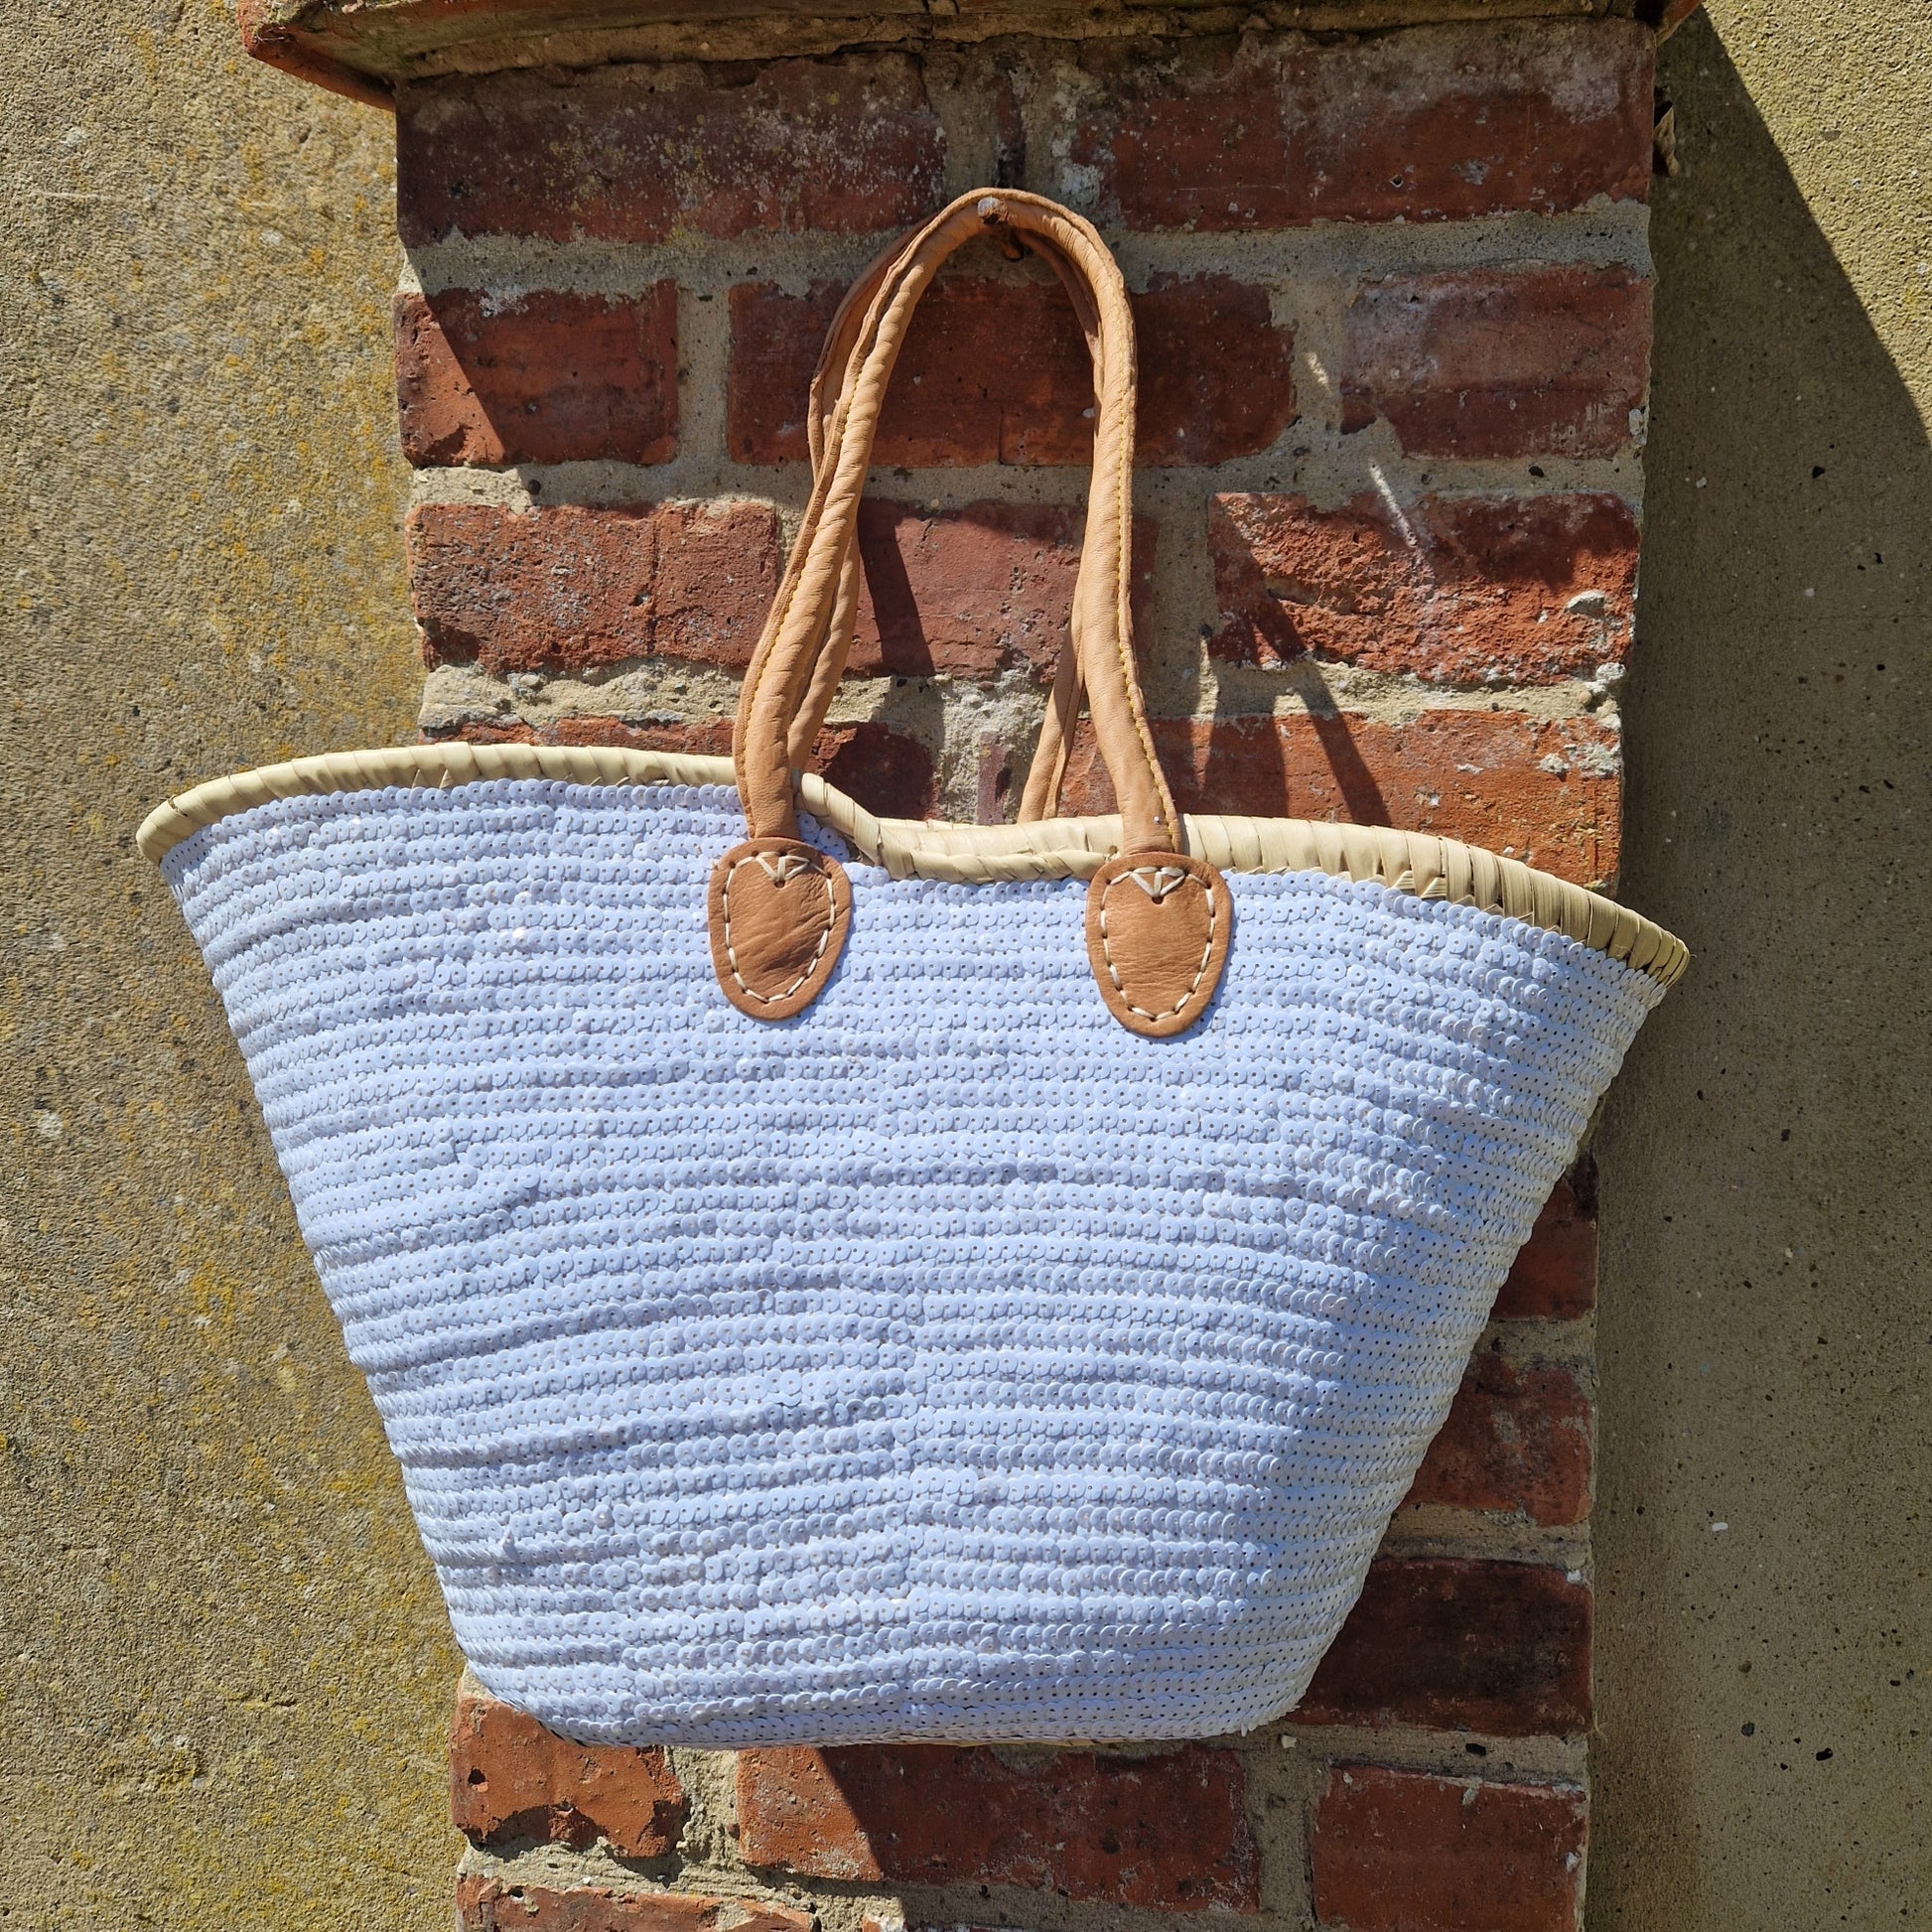 Morrocan hand woven basket with leather handles decorated with white sequins